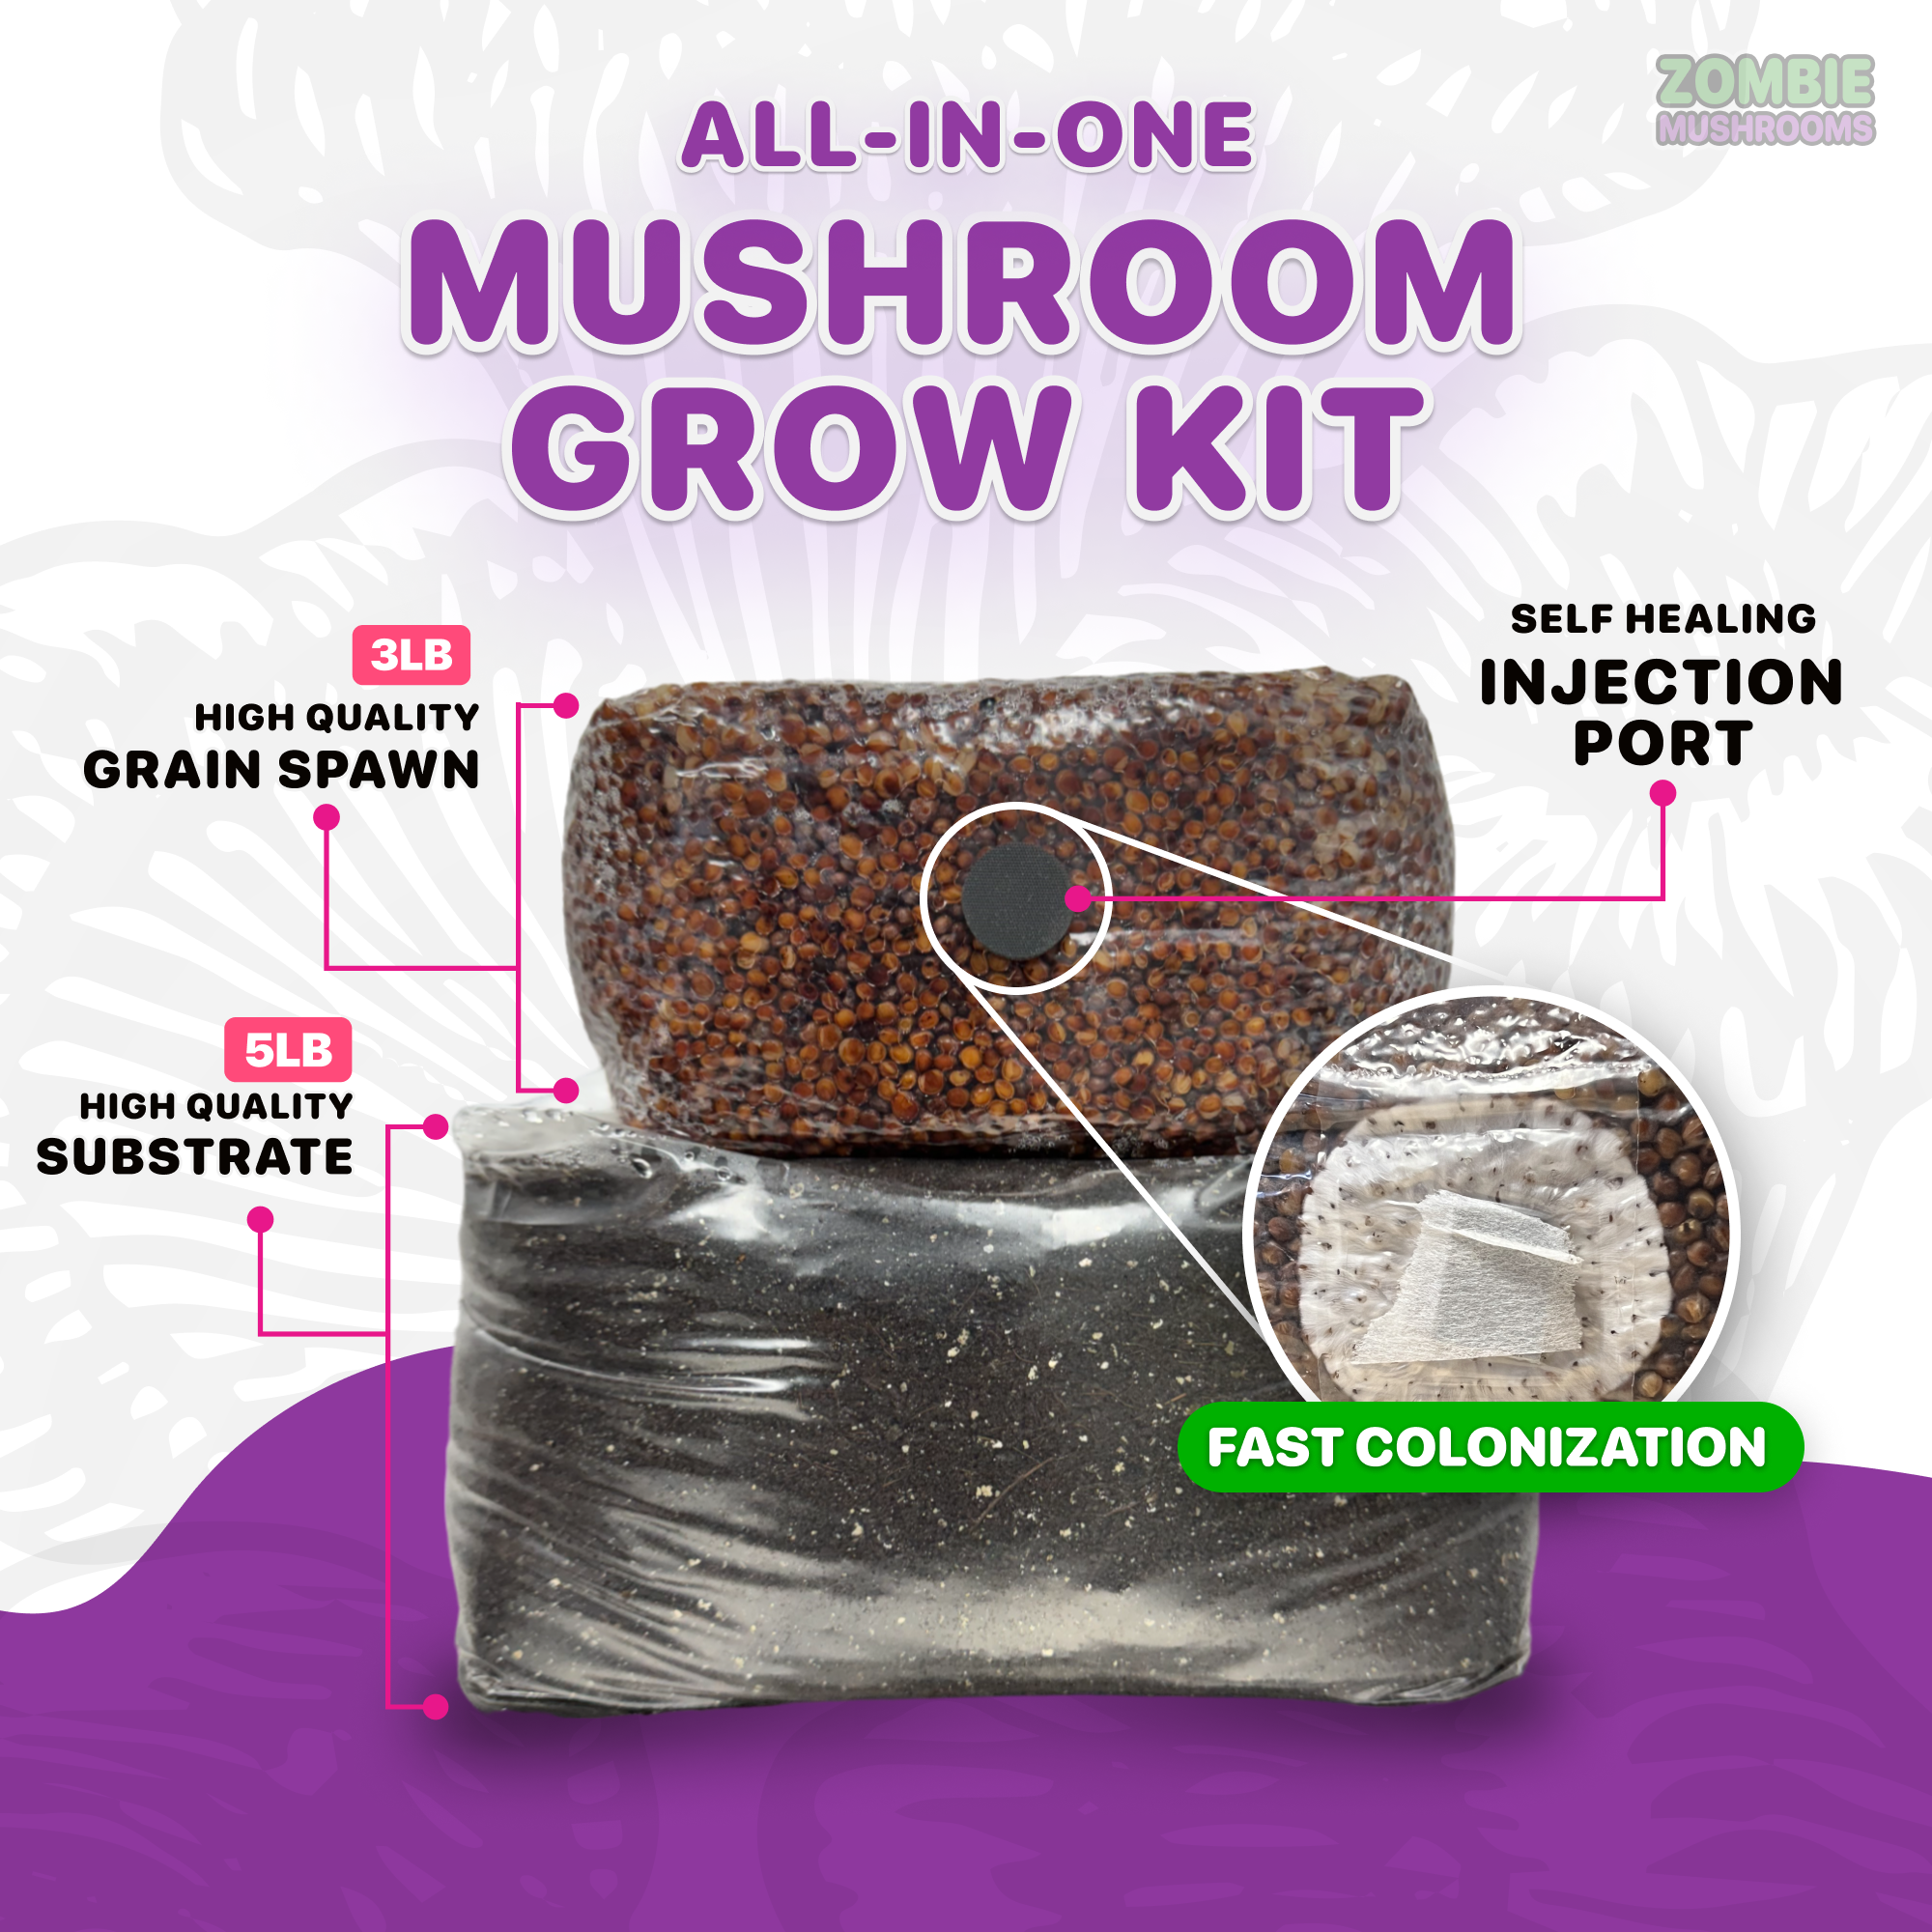 an image of all-in-one mushroom grow kit and the self healing injection port